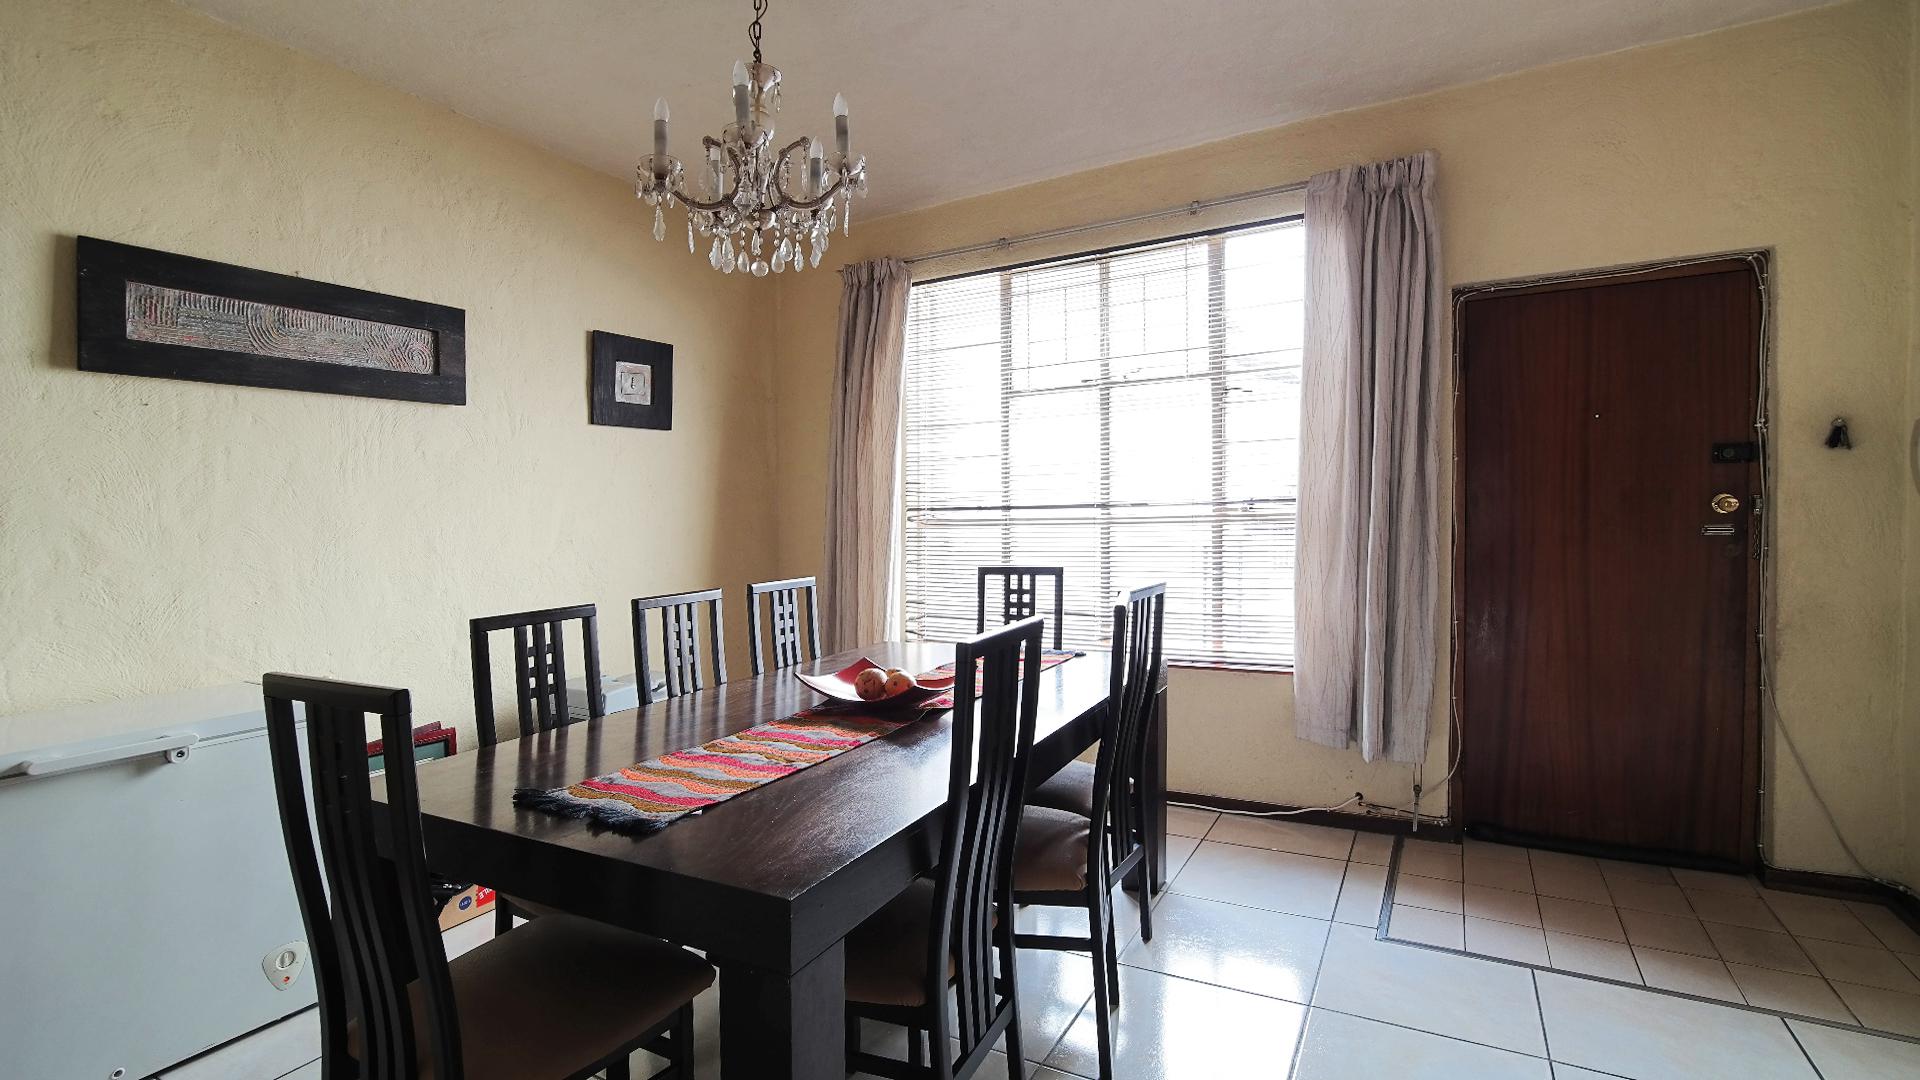 Dining Room - 18 square meters of property in Bramley Park